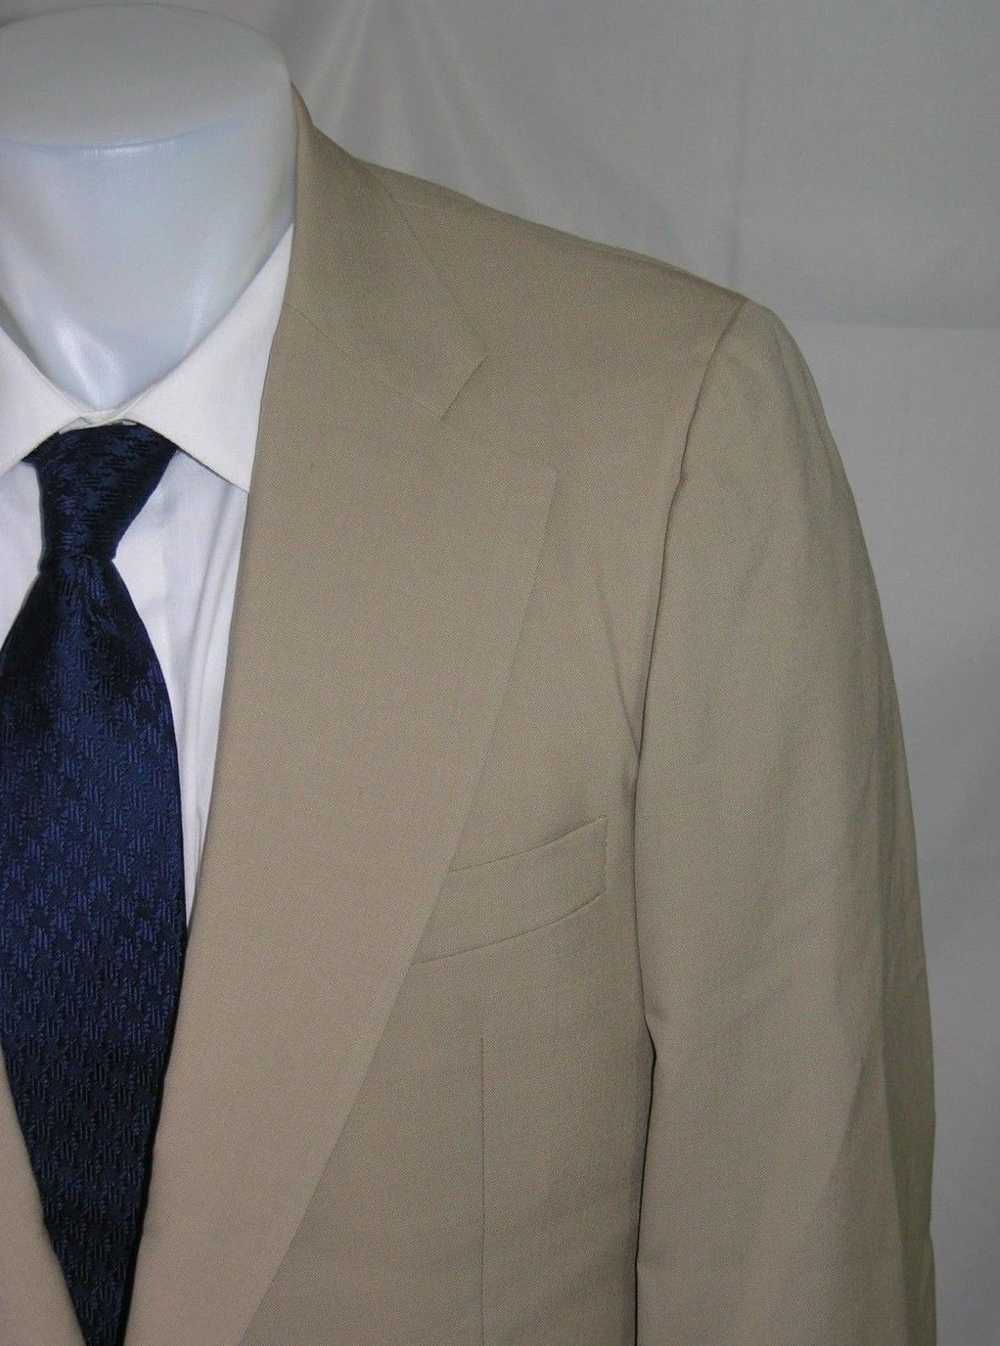 Alfred Dunhill Bespoke Two Button Blazer 40R - image 3